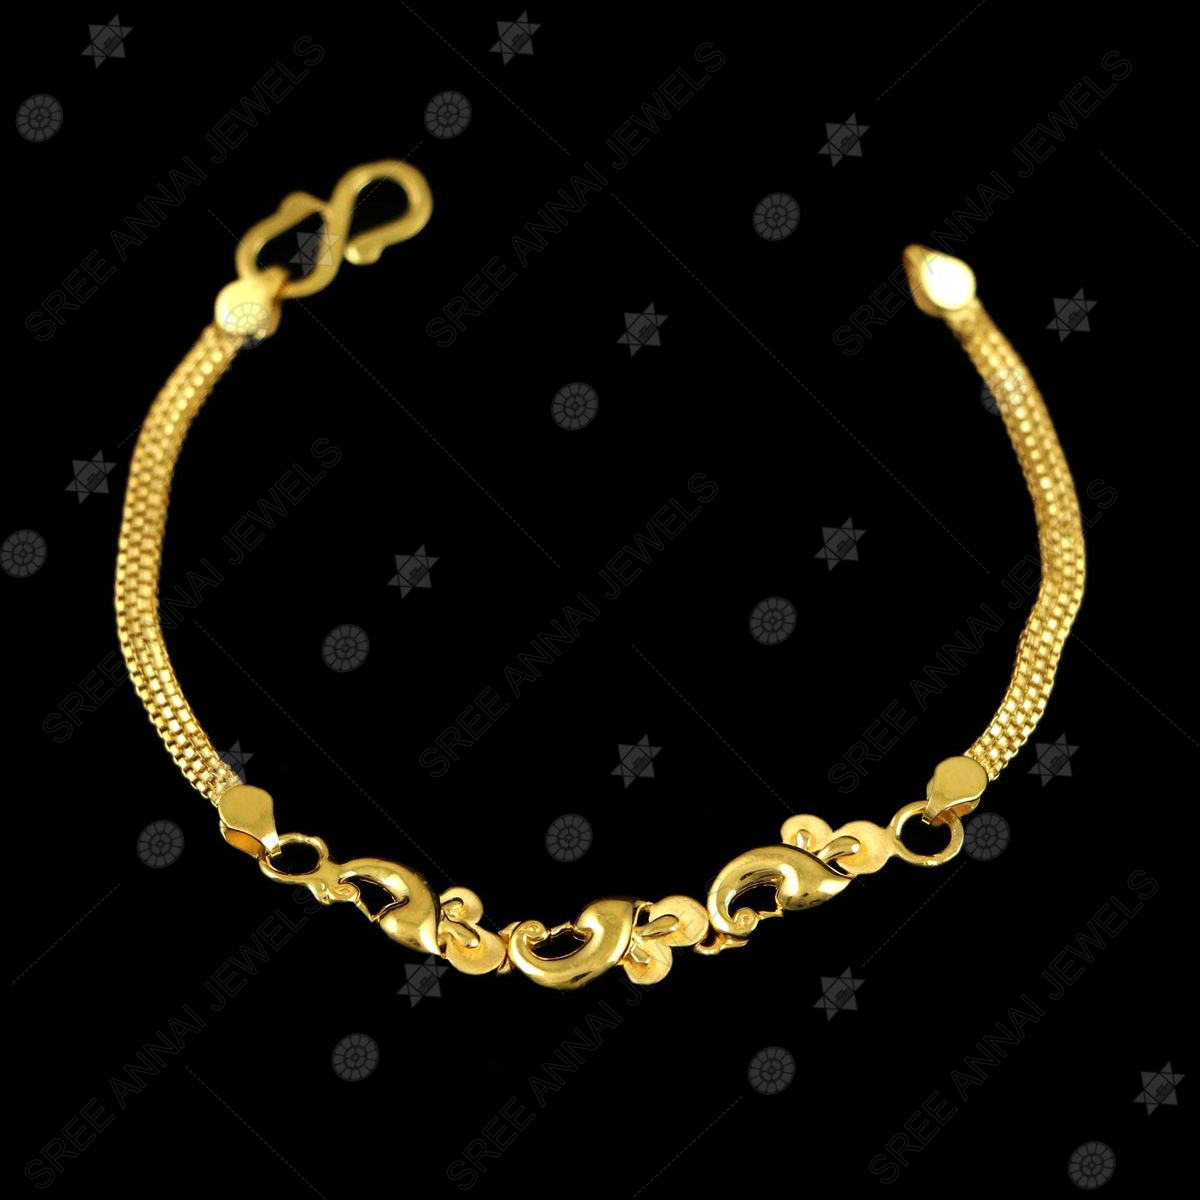 Gold Coin Bangles Egyptian For Baby Girls Wando Dubai Israel Jewelry, Gold  Bracelet Ring For Boys And Children Arab Birthday Gifts Q0719 From  Sihuai05, $5.96 | DHgate.Com